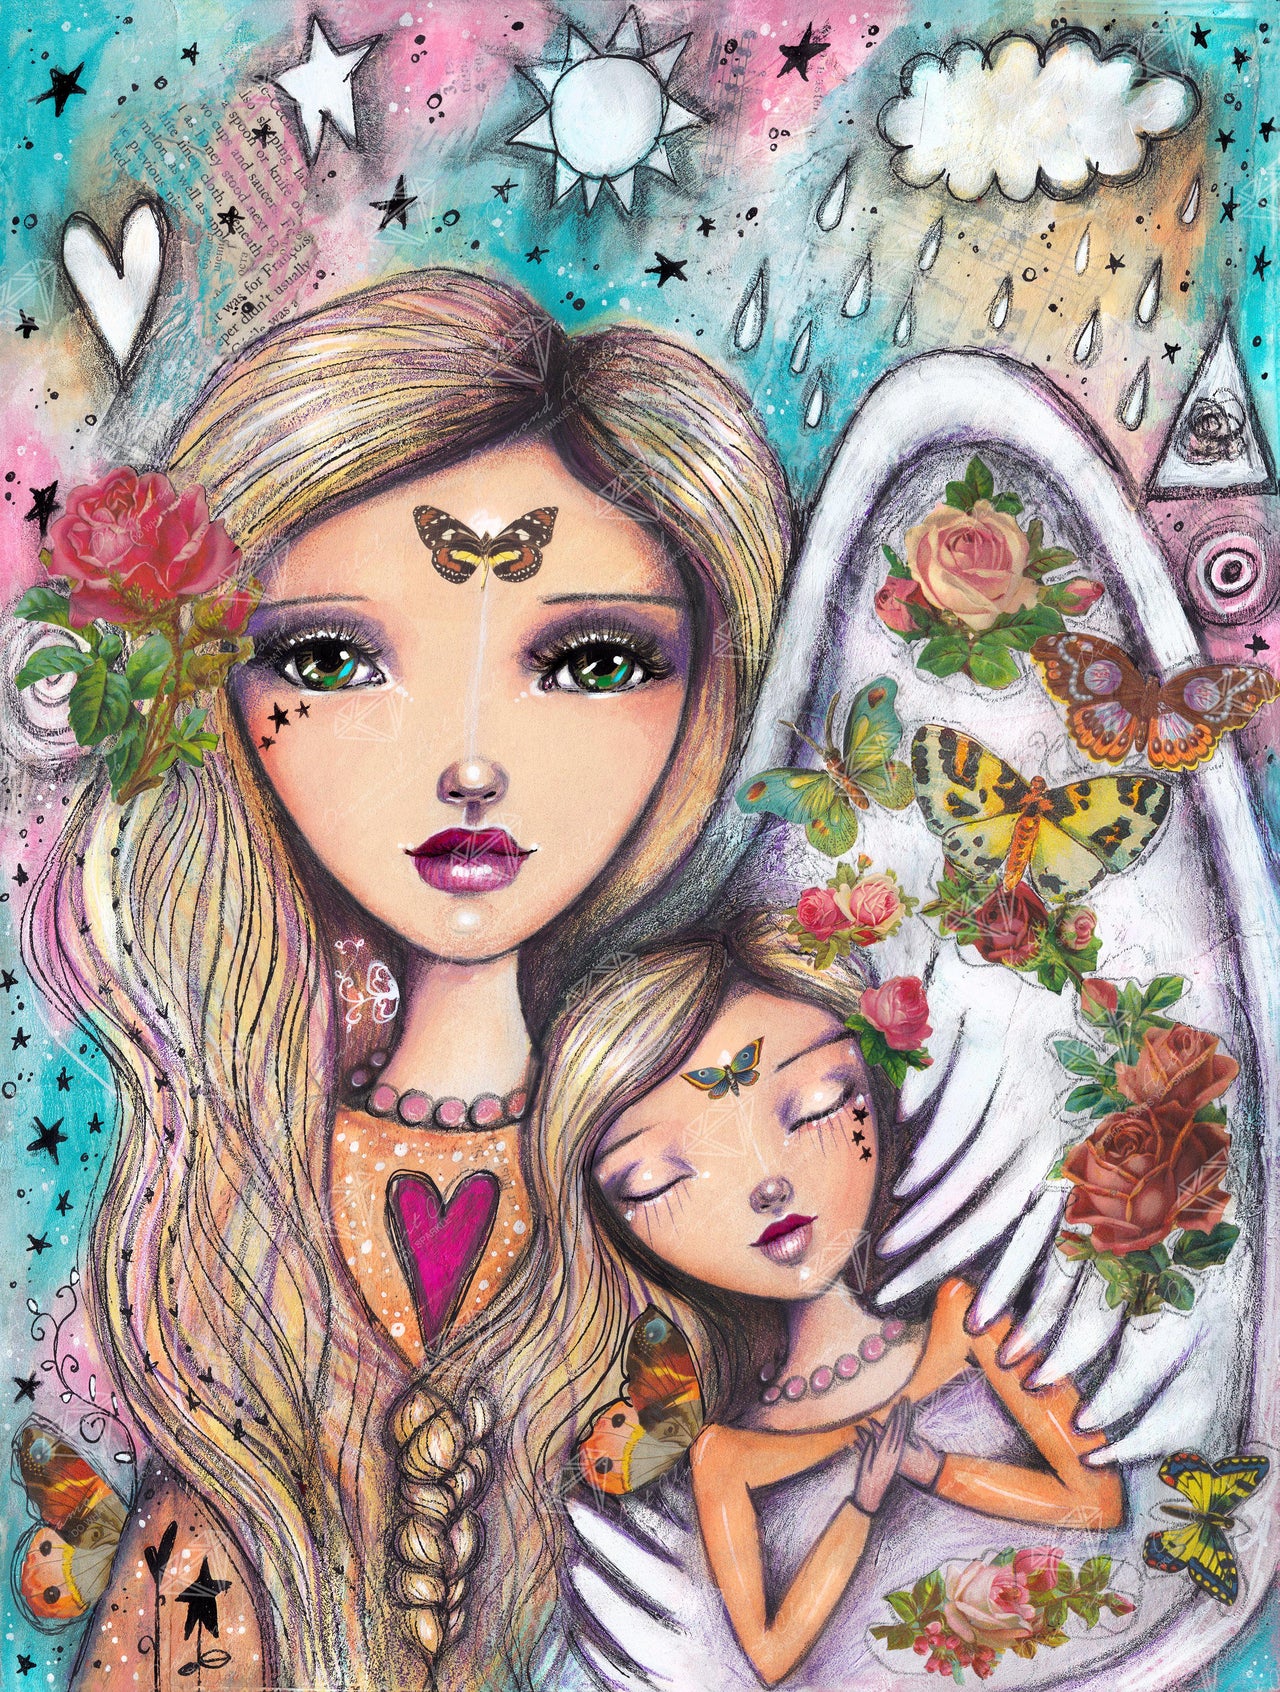 Diamond Painting Angels With You 22" x 29″ (56cm x 74cm) / Round with 60 Colors including 4 ABs / 52,336